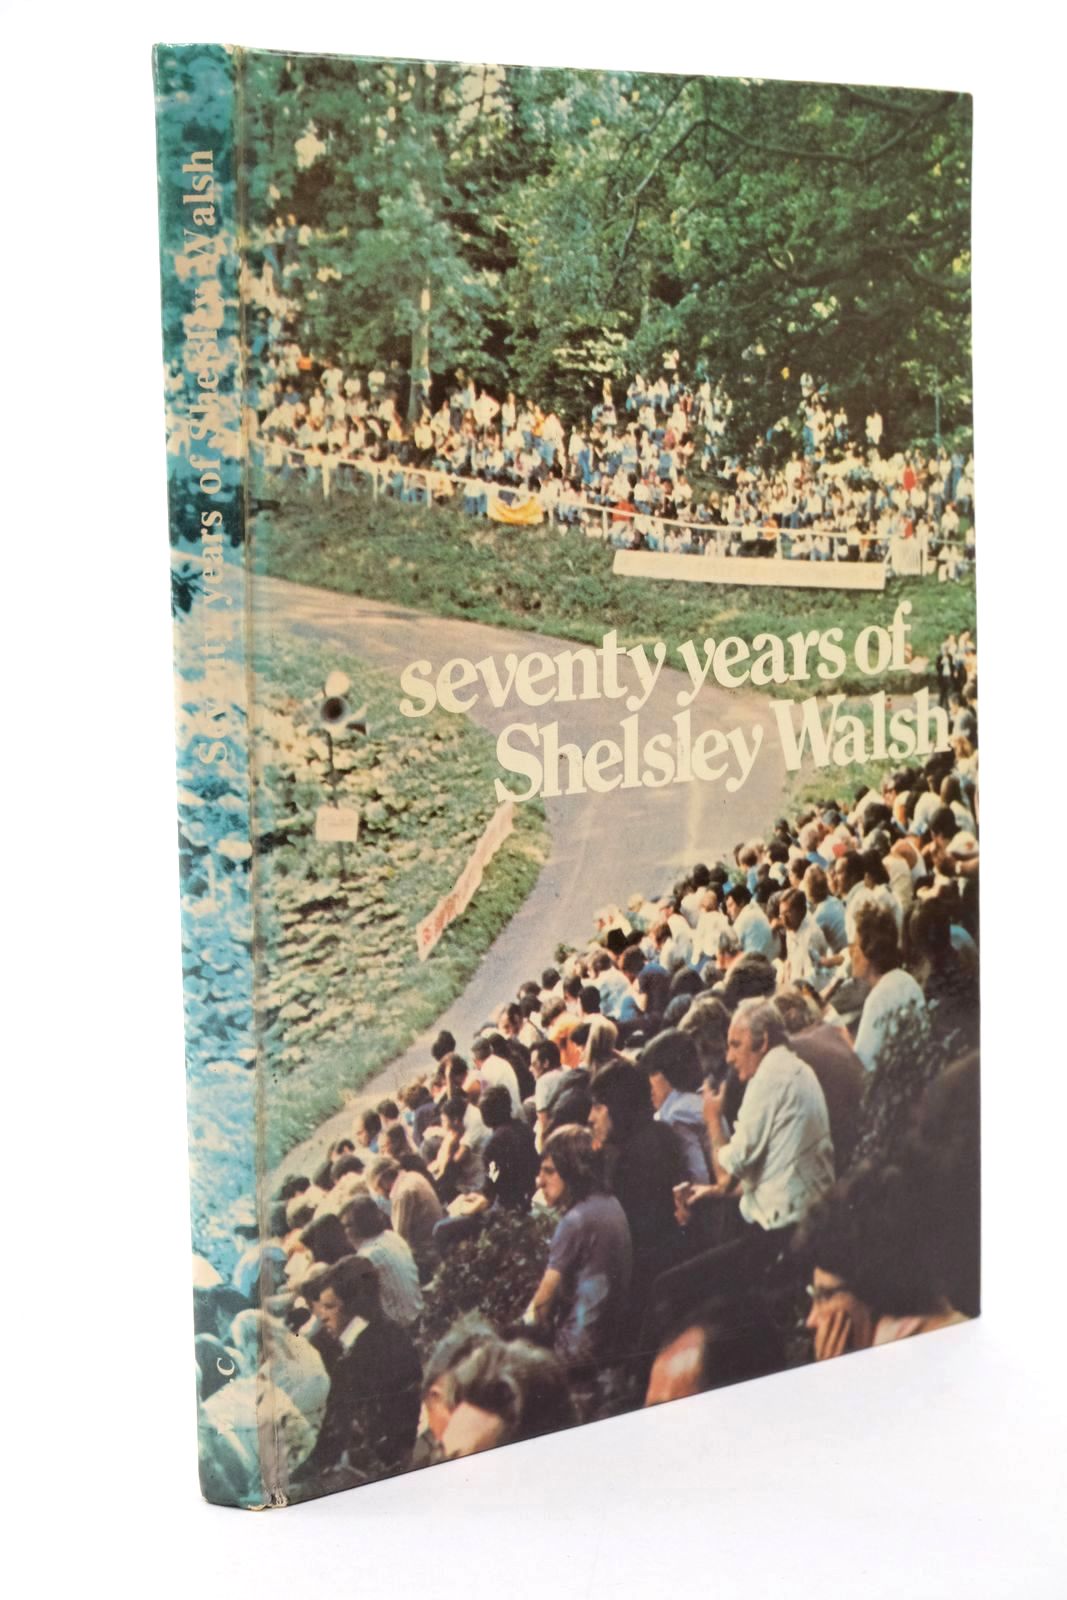 Photo of SEVENTY YEARS OF SHELSLEY WALSH- Stock Number: 1322480